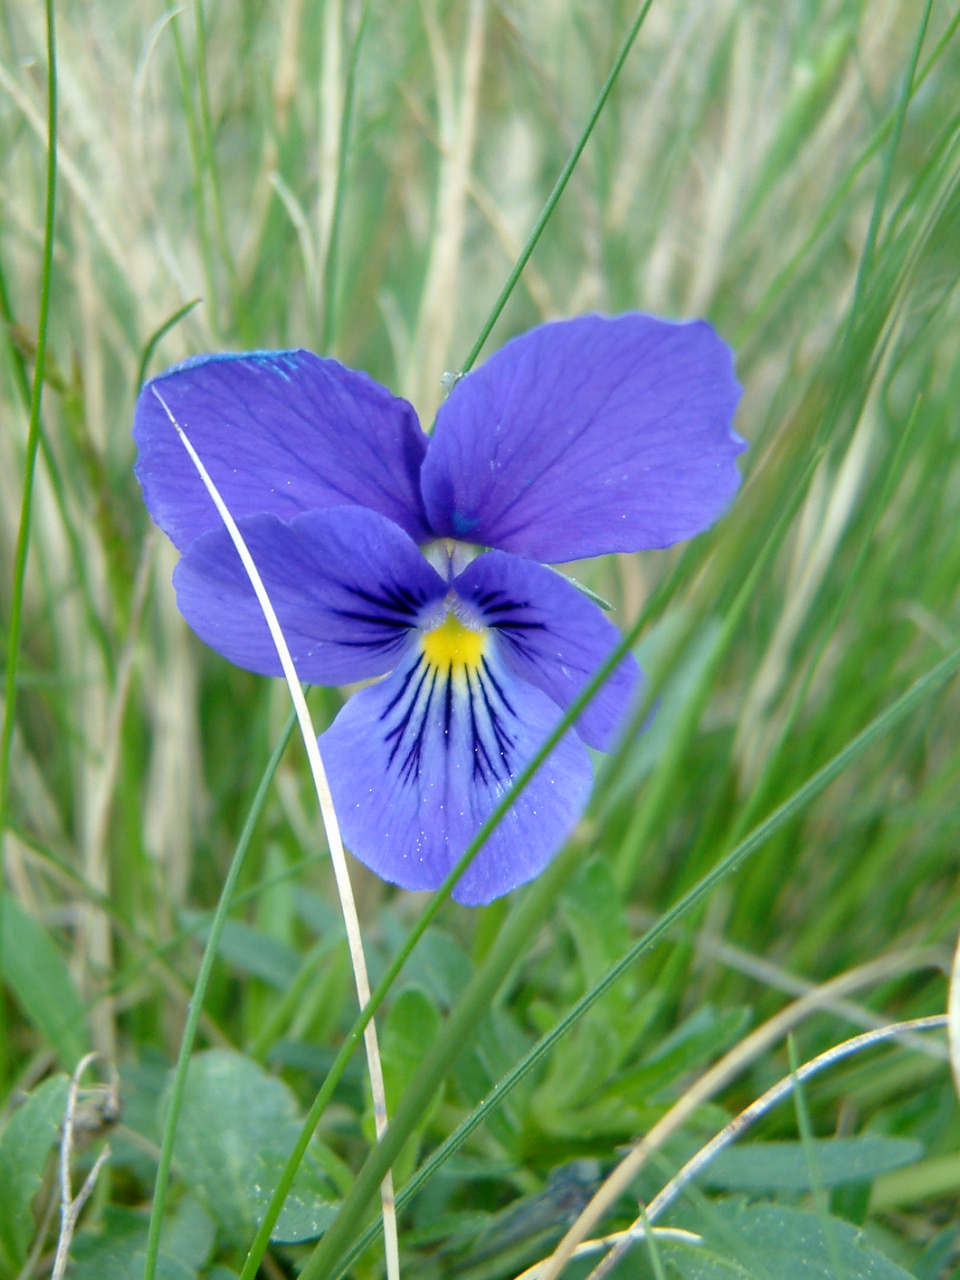 The zinc violet grows in the Alps because zinc is naturally present in the soil in high quantities and the zinc violet knows this and likes it. It’s right in its element, zinc in this case! 